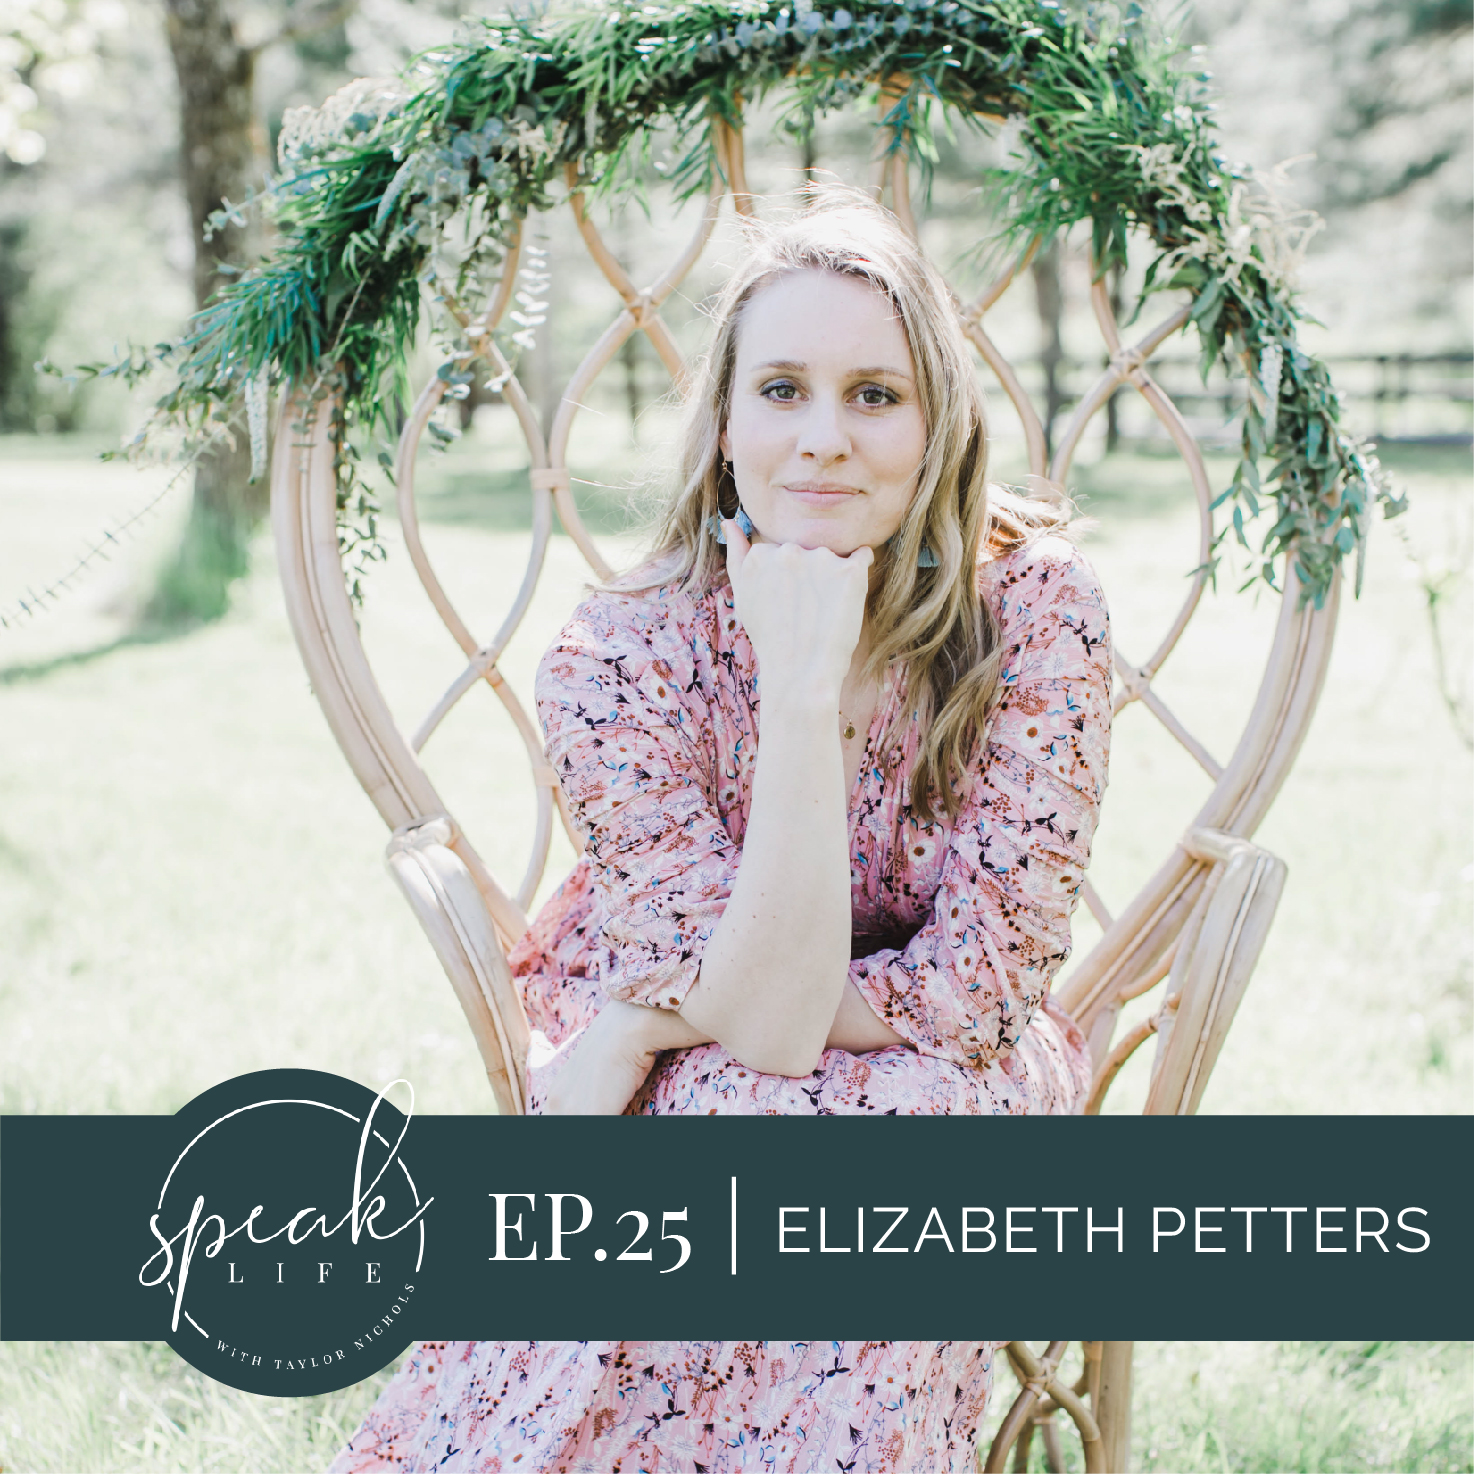 Episode 25. Elizabeth Petters – From ‘anxiously existing’ to ‘lovingly living’